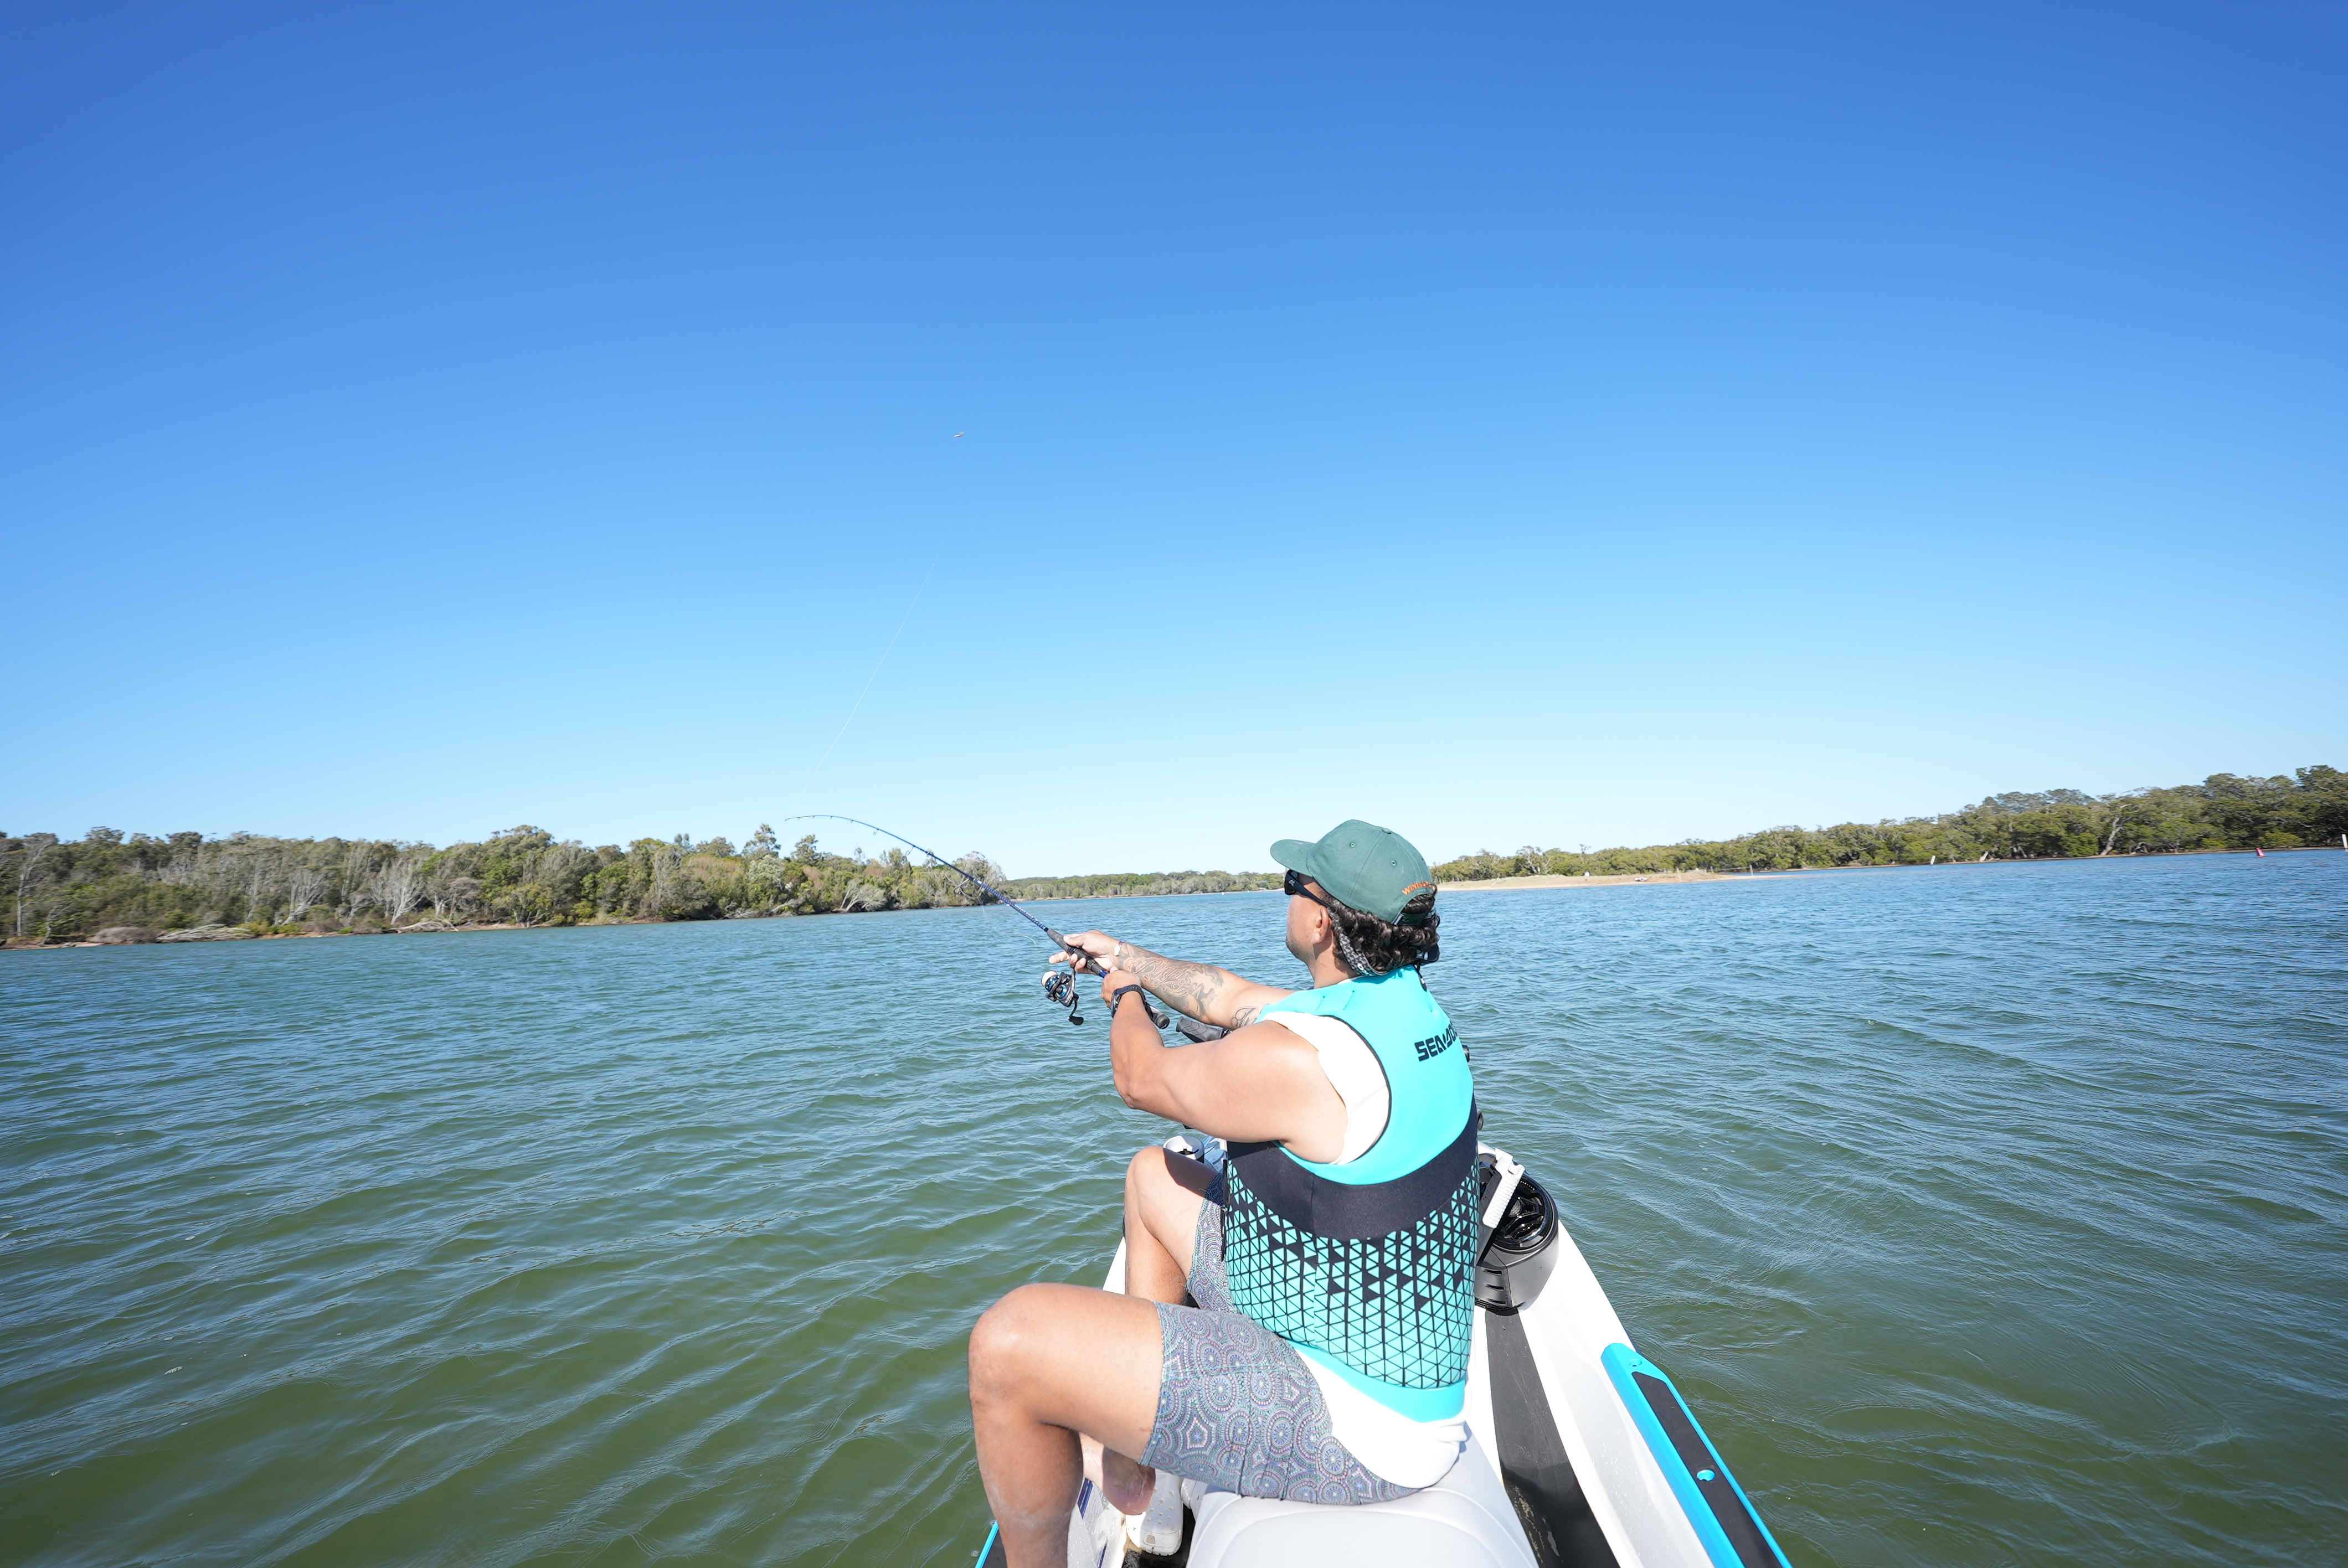 SEE WHAT RUGBY LEAGUE STAR LATRELL MITCHELL GETS UP TO OFF FIELD, ON THE LAND AND IN THE WATER